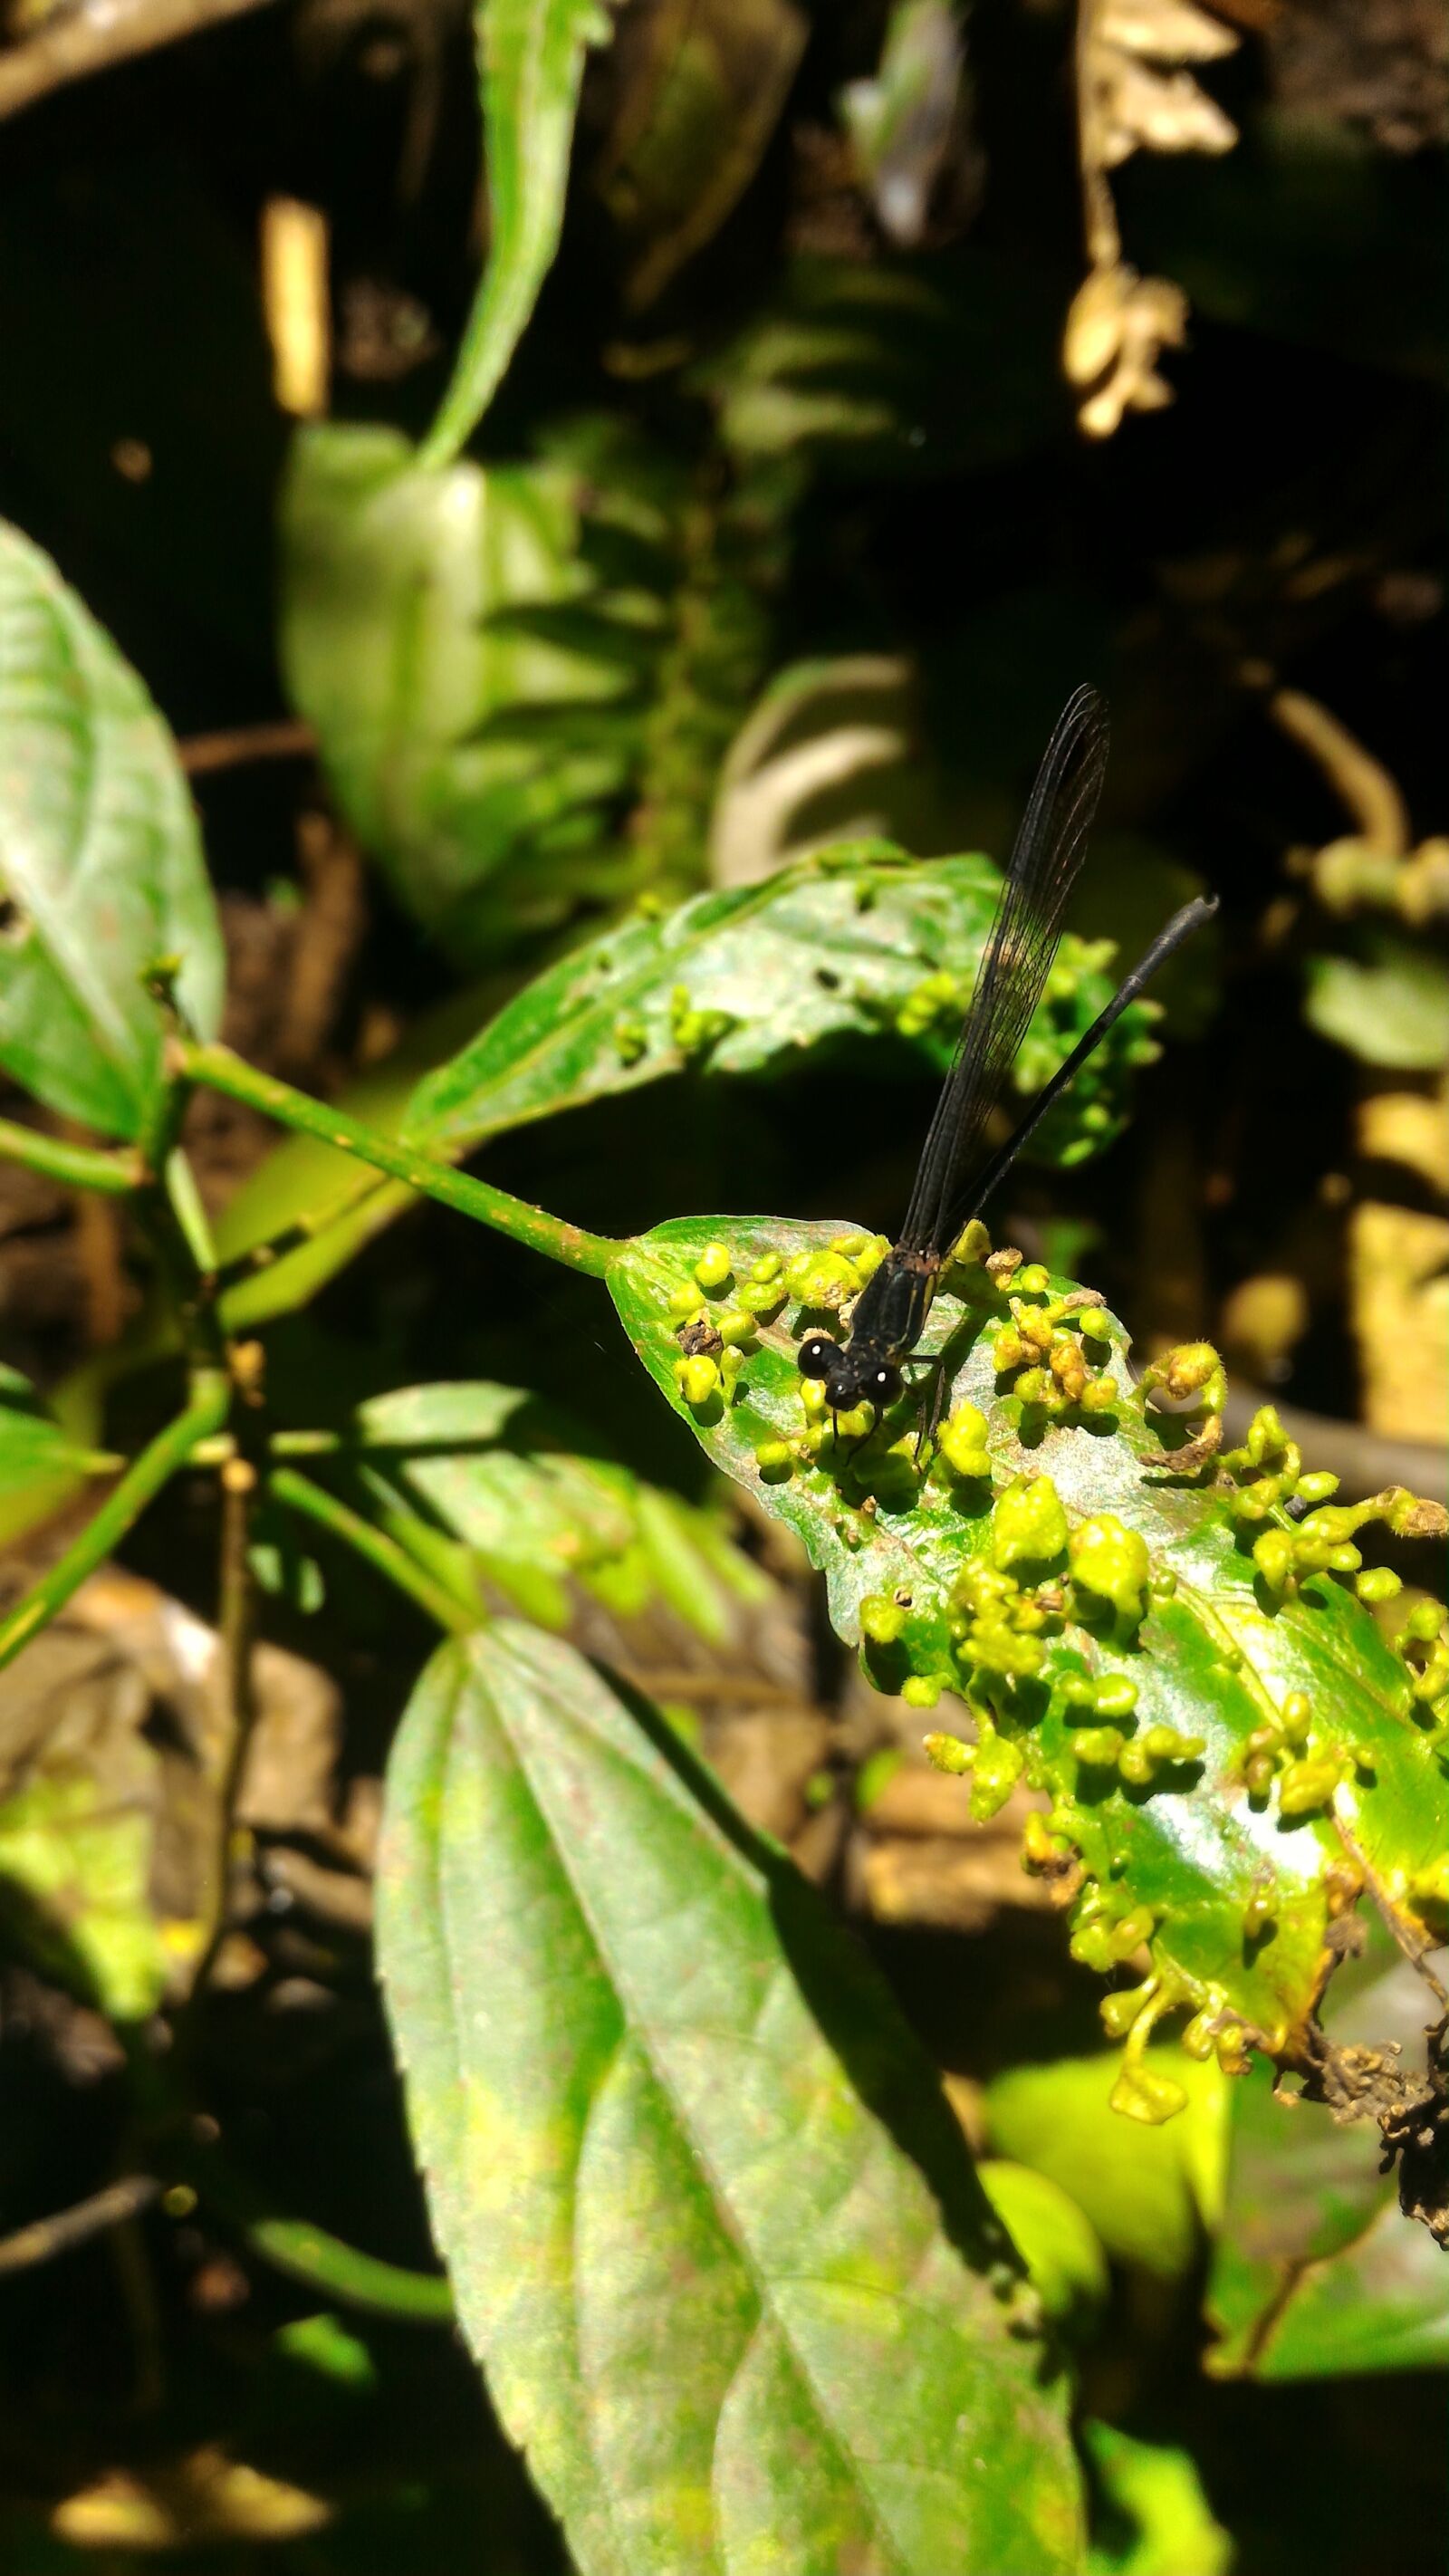 ASUS Z00AD sample photo. Dragonflies, insect, nature photography